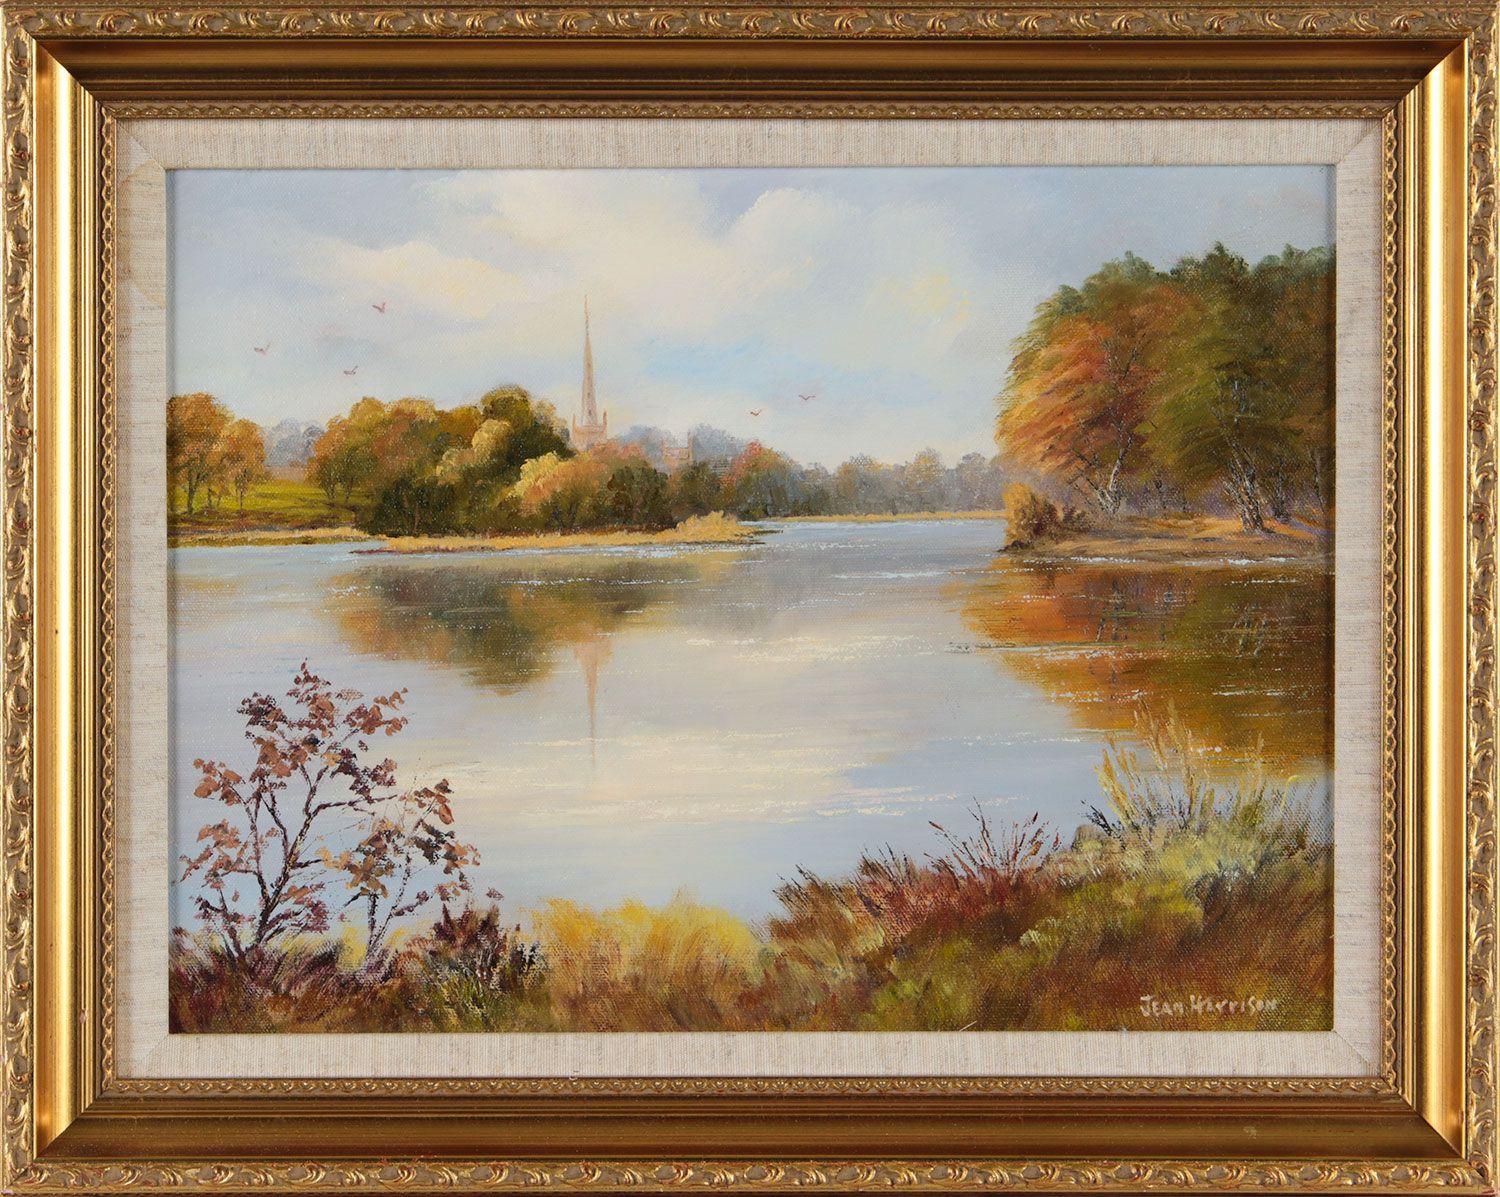 Jean Harrison Landscape Painting - Oil Painting of Lake Scene Northern Ireland with Village Church by Irish Artist